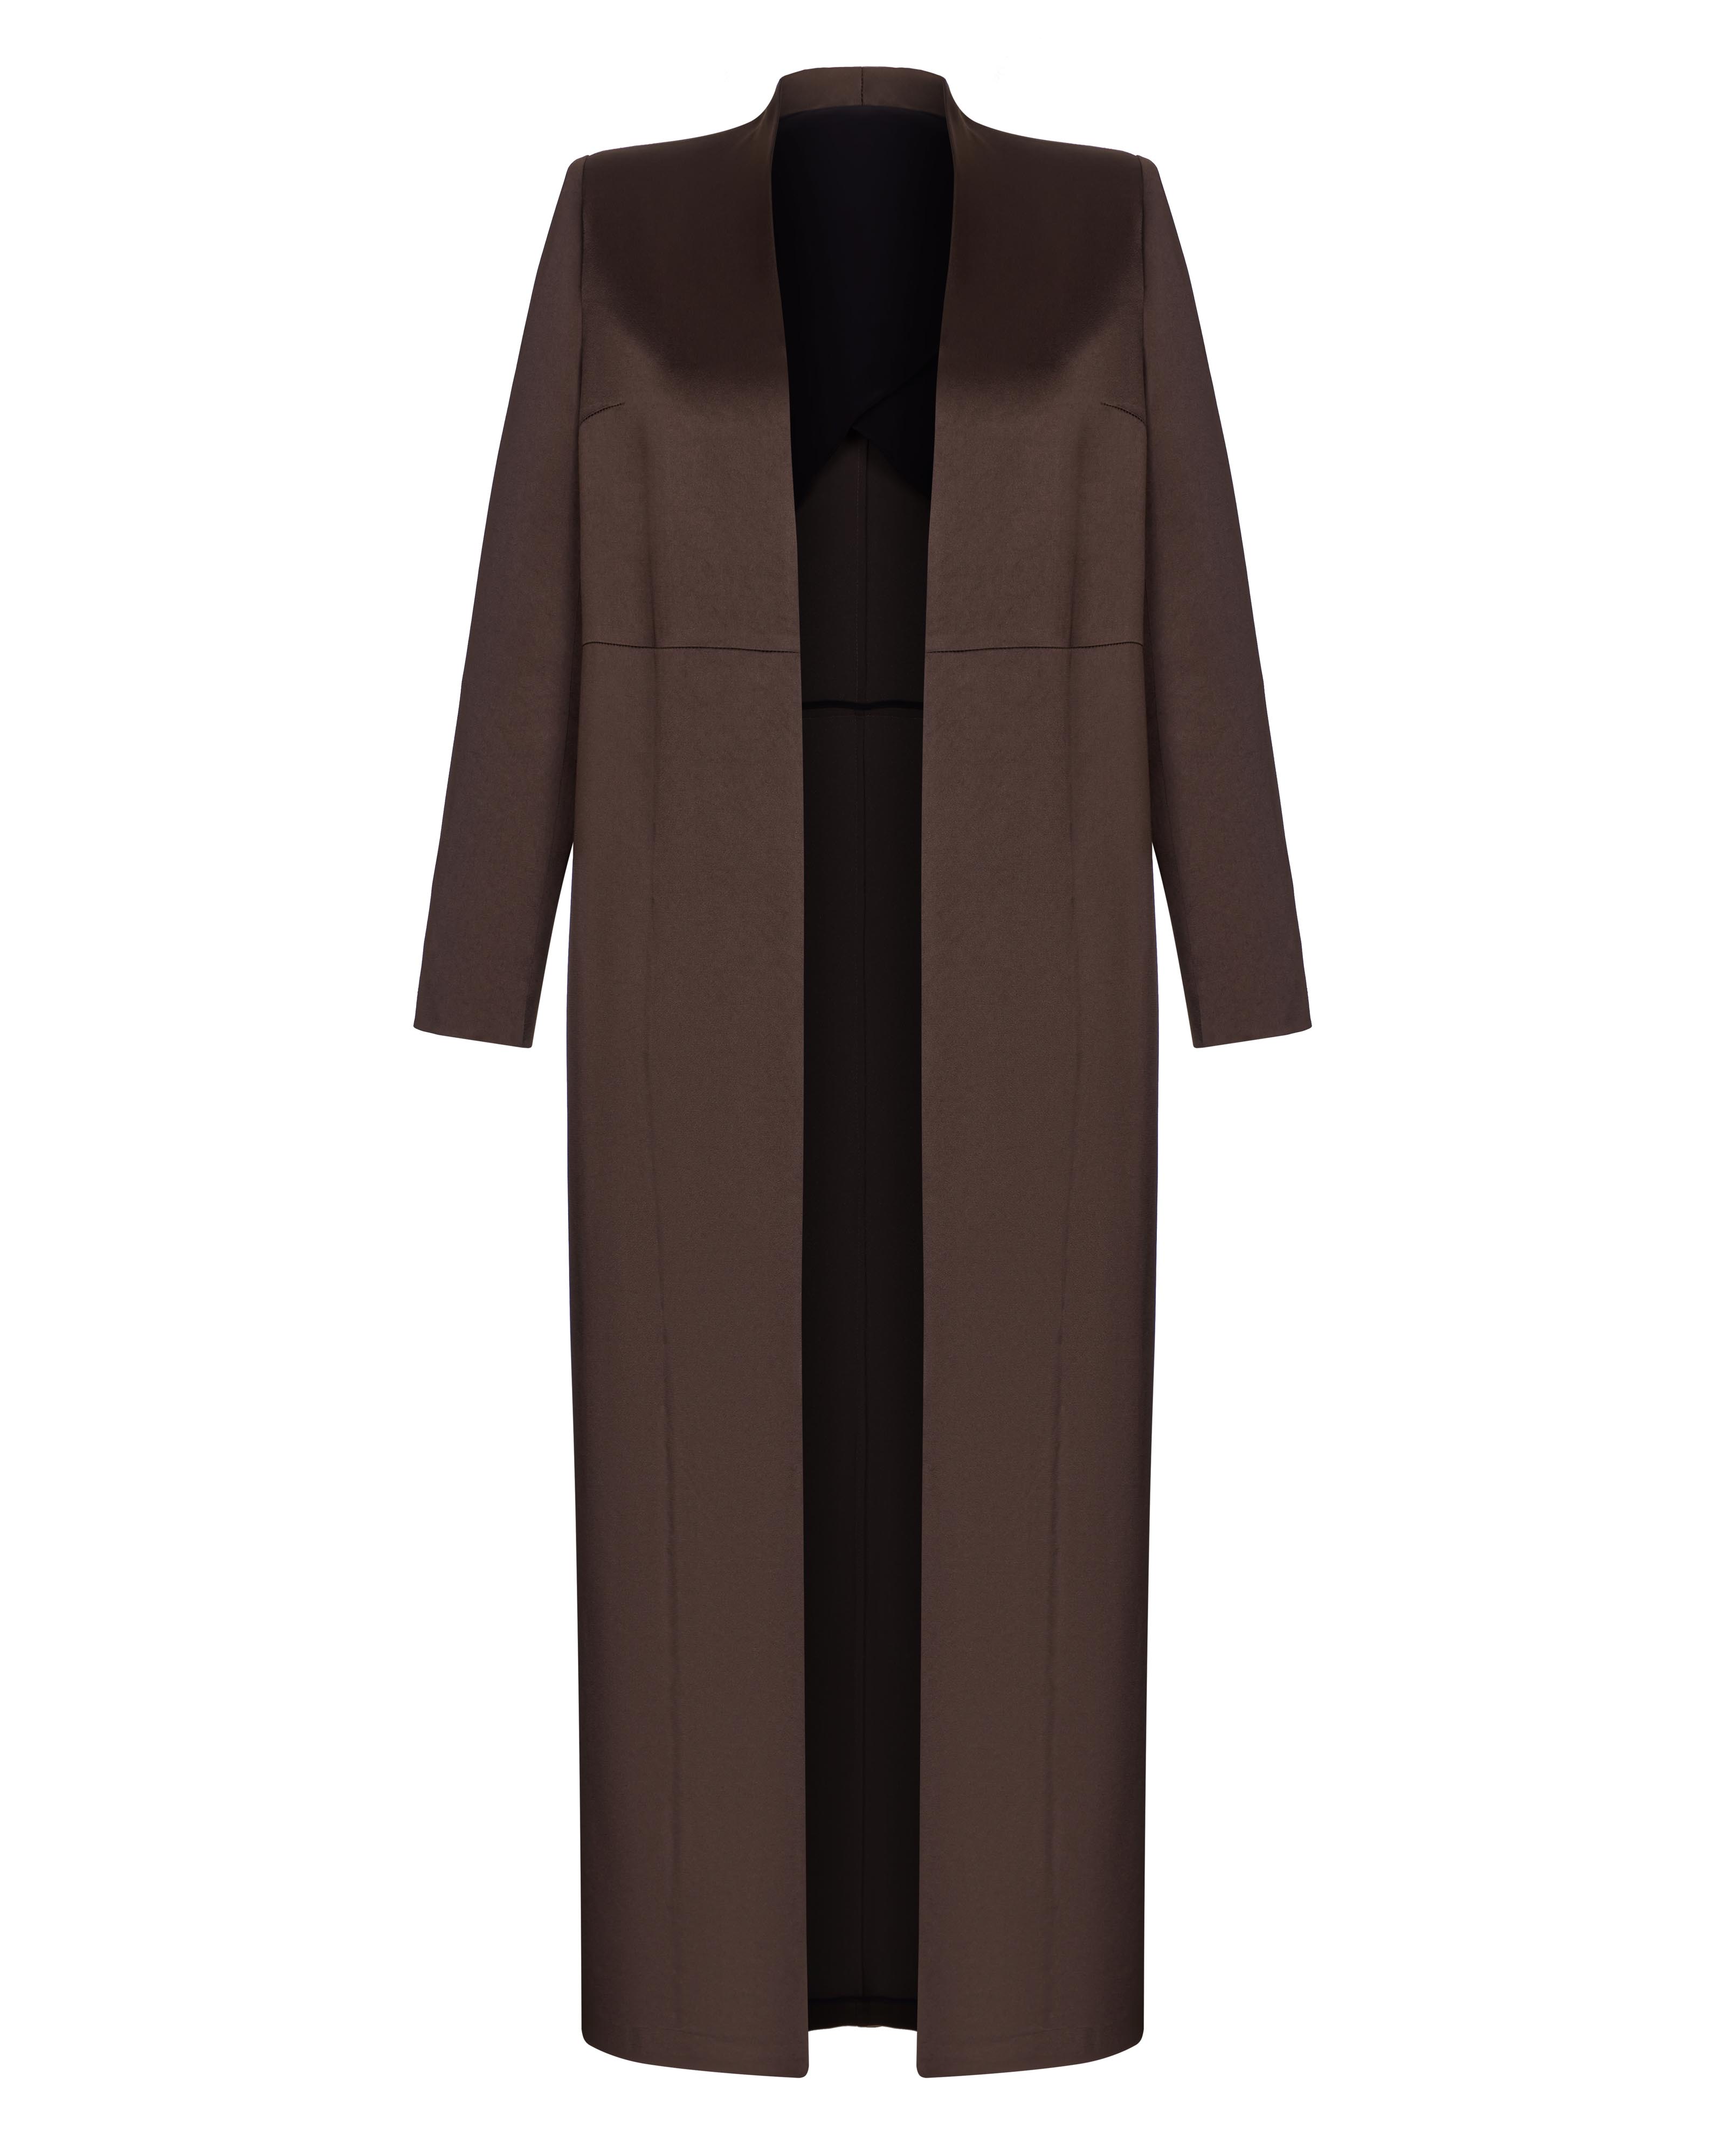 BROWN TRENCH